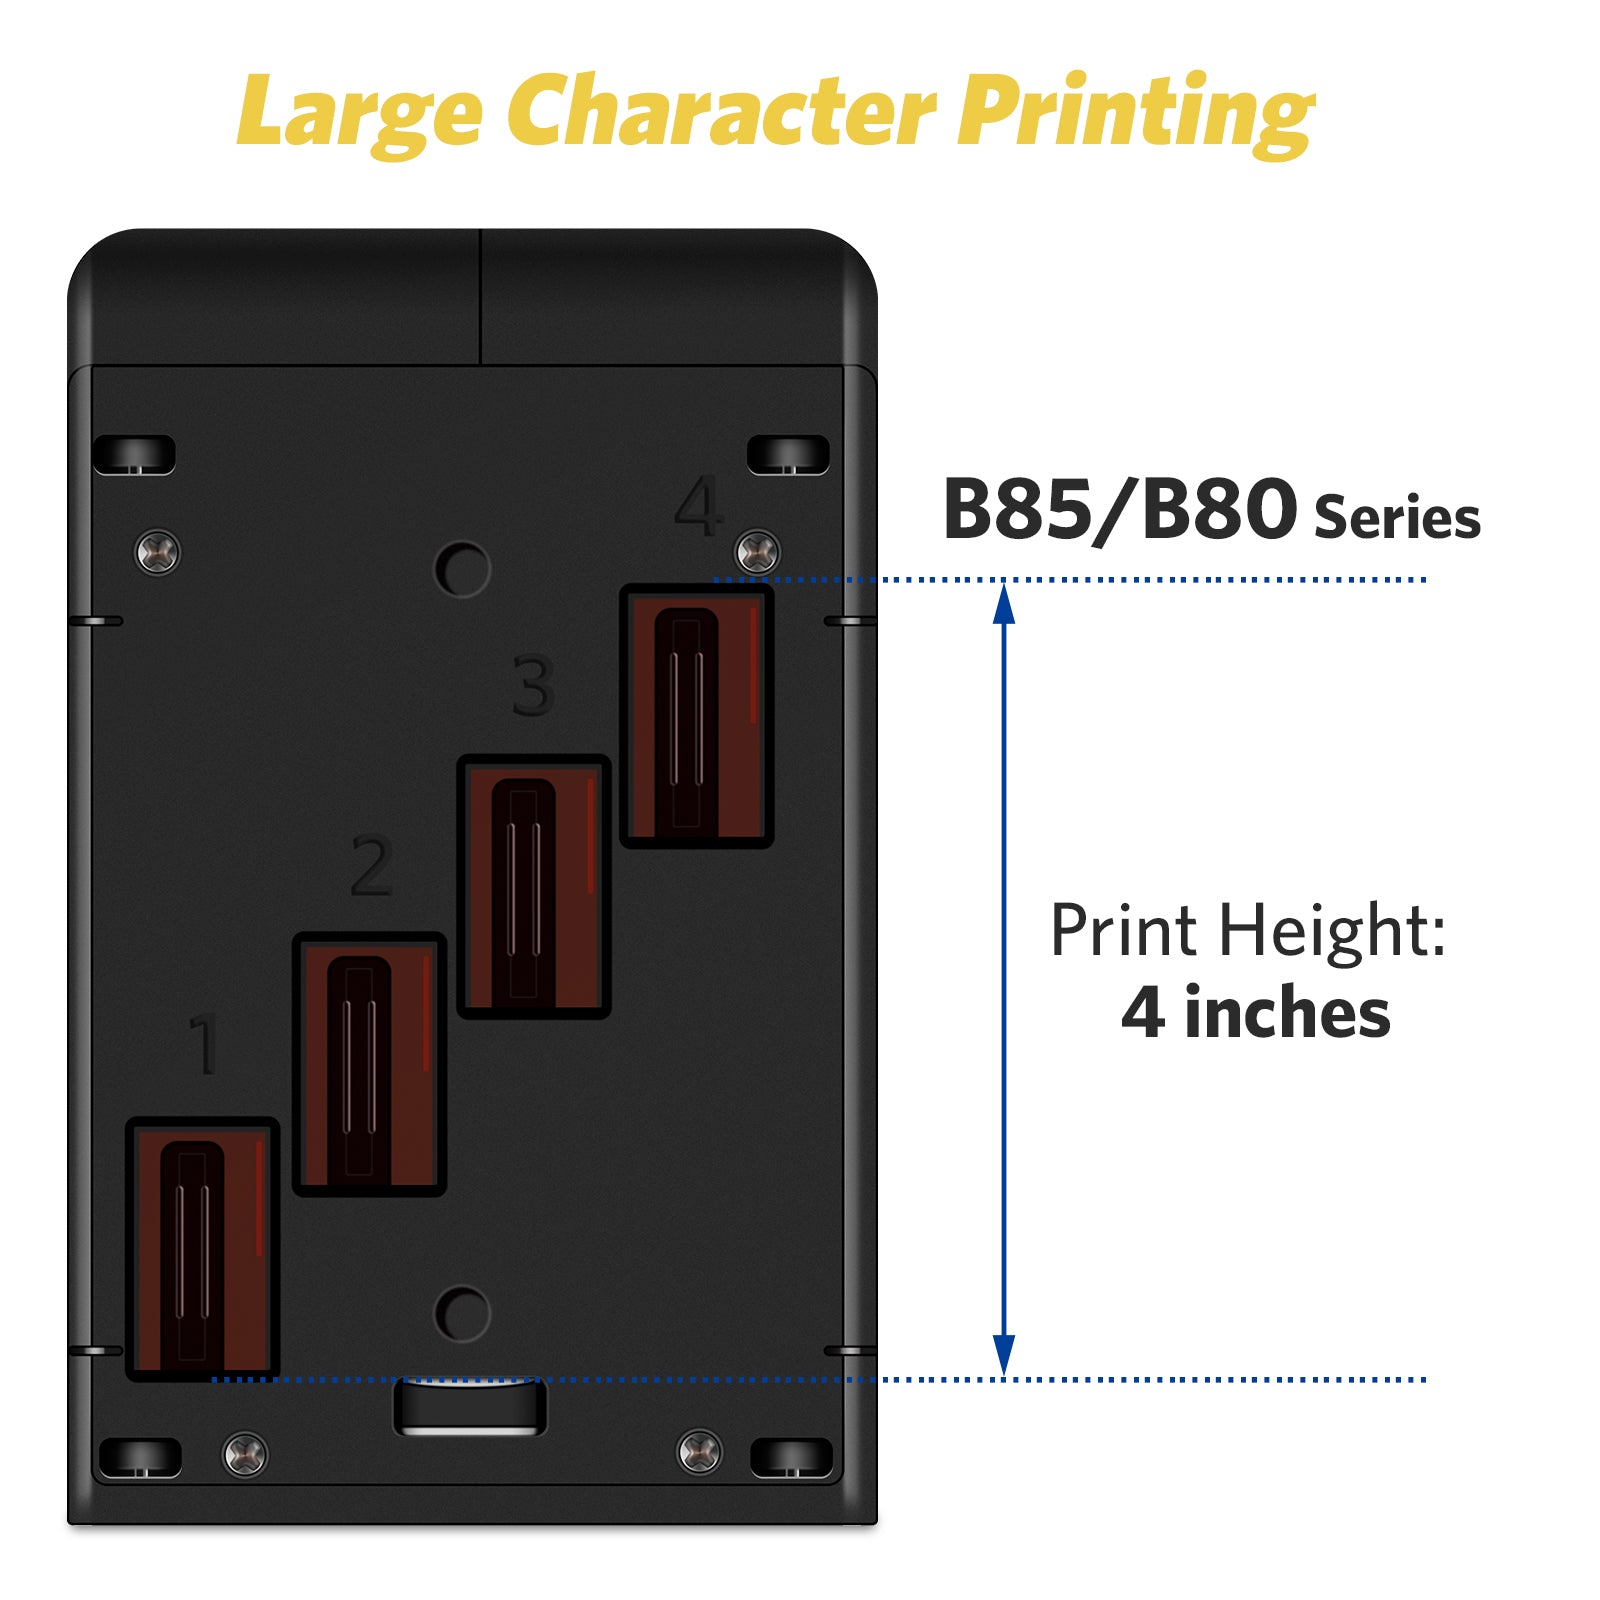 BENTSAI B35 One inch Handheld Inkjet Printer, Large Character Inkjet Printer, Up to 1" 25mm Print Height, Use for Both Water-Absorbing and A - 3